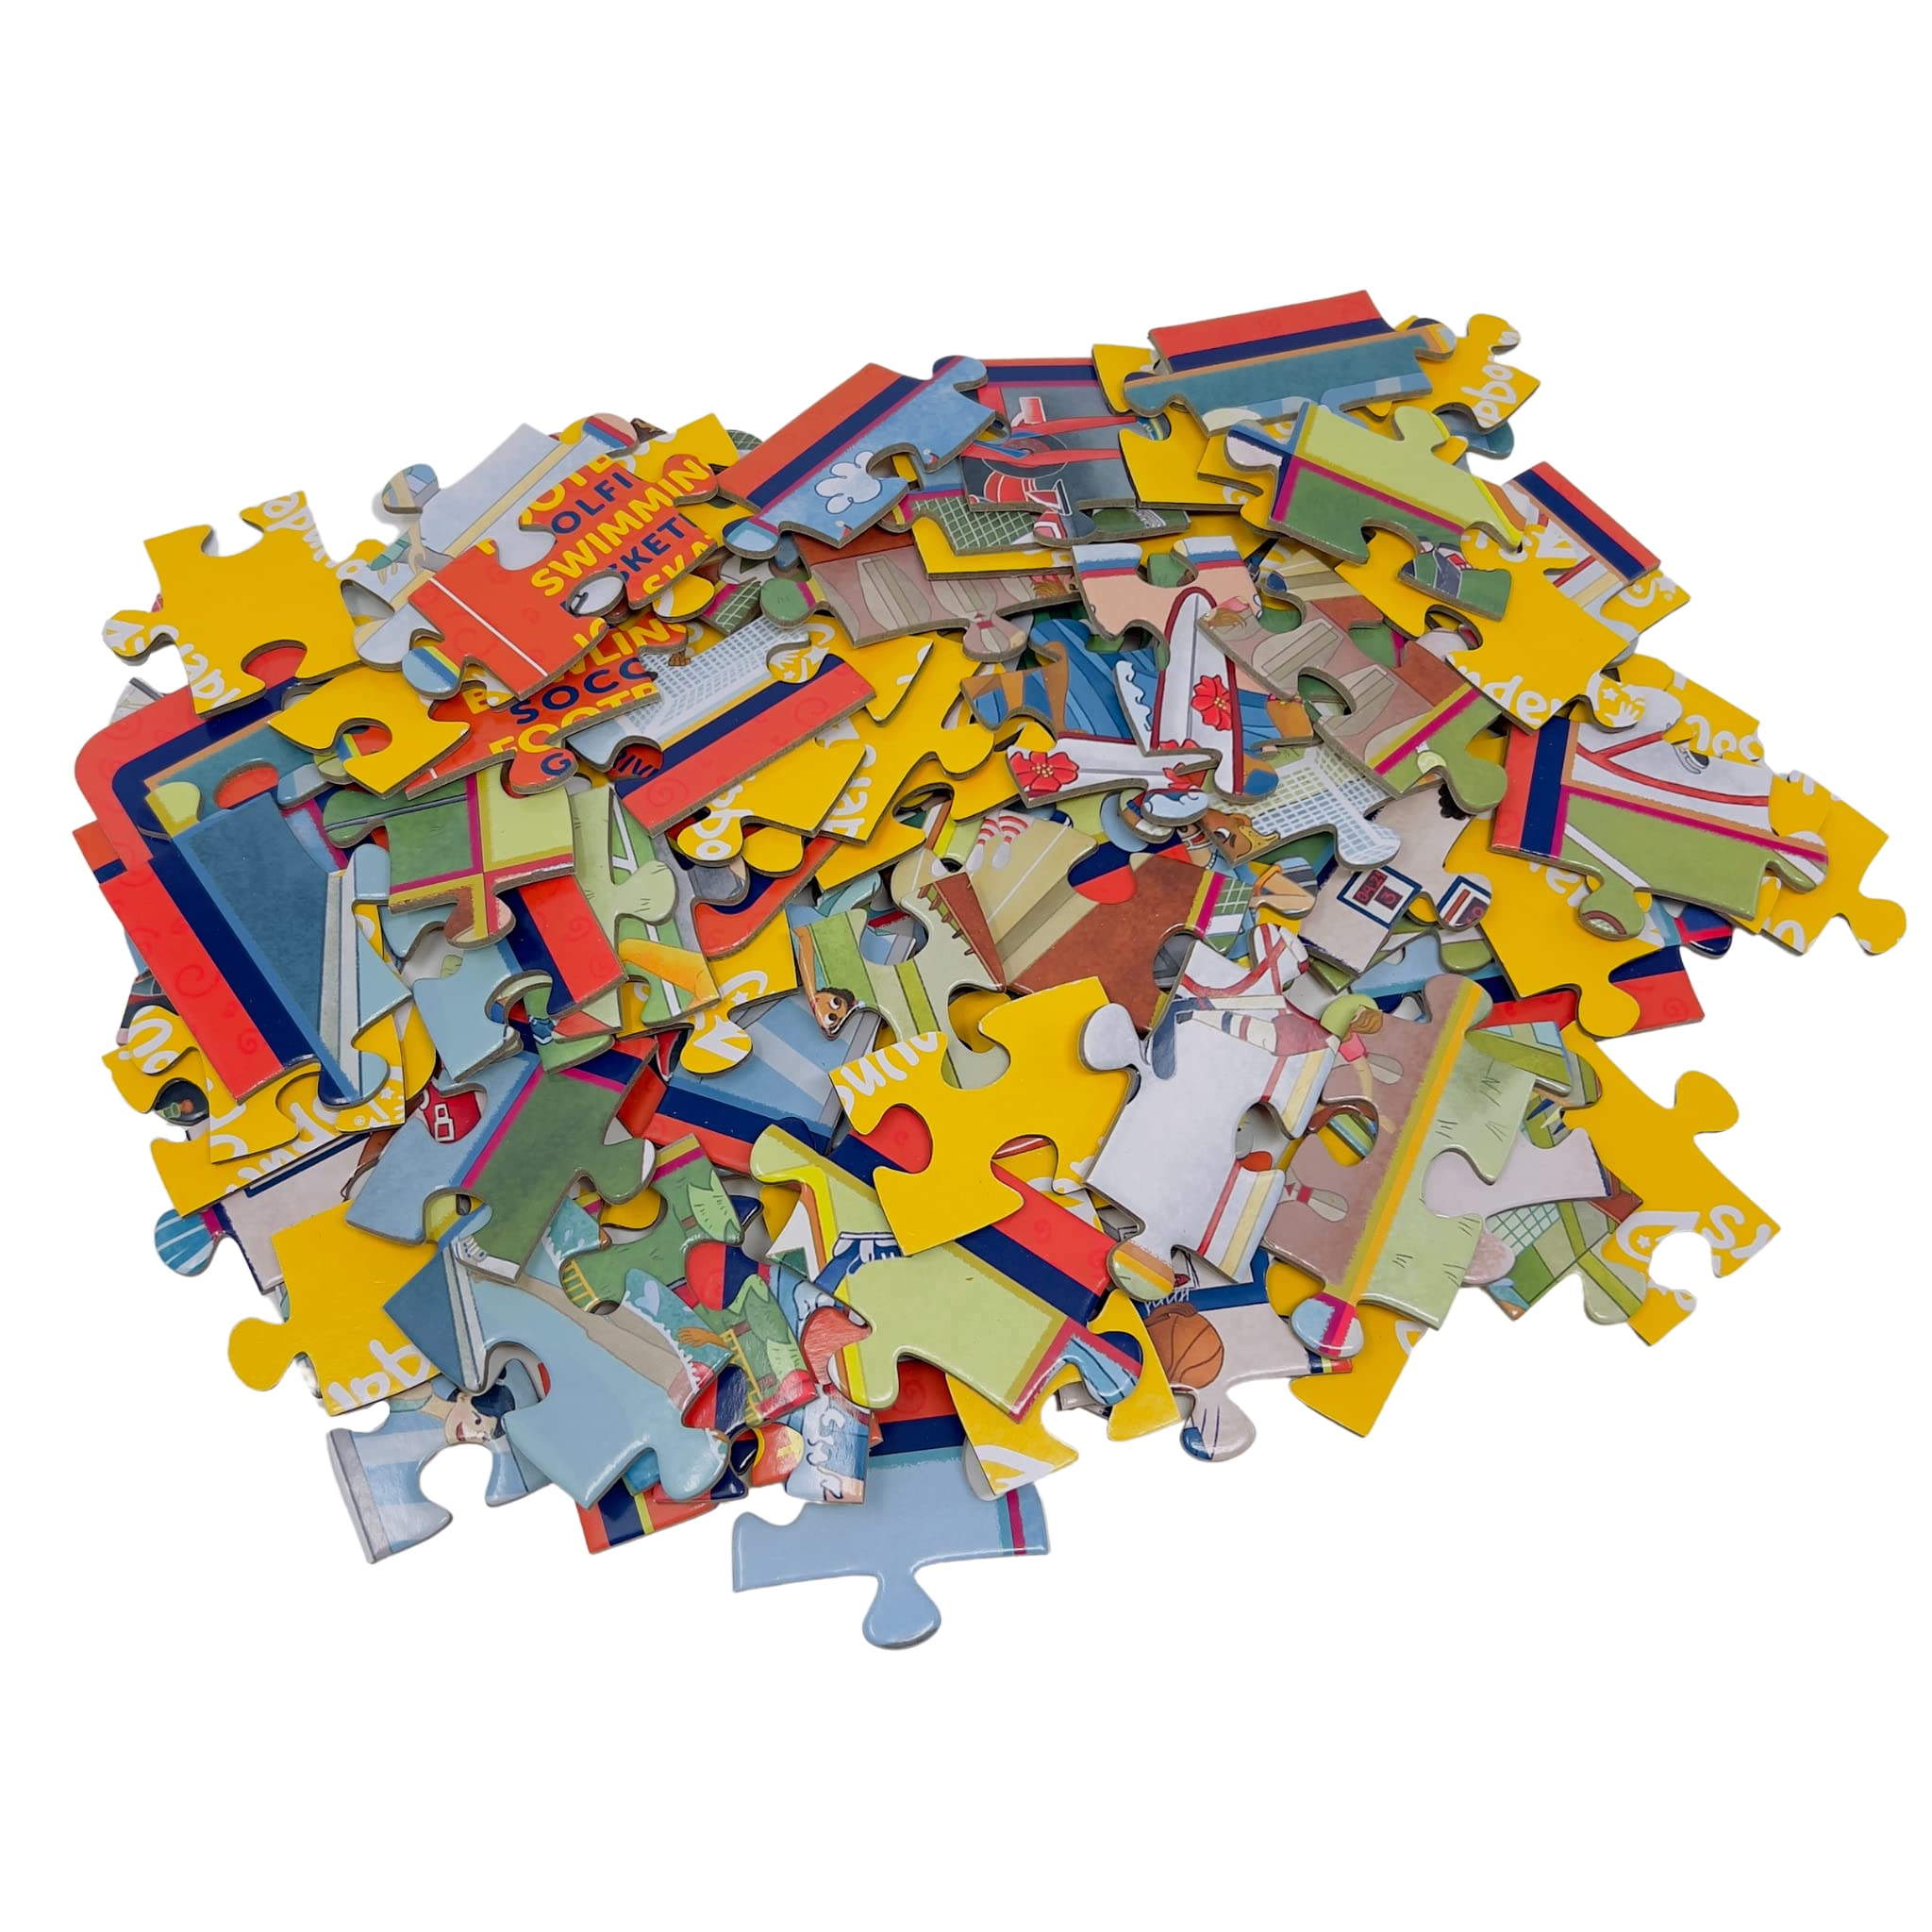 Upbounders: Popular Sports -100 pc Puzzle for Kids, (Multicultural)